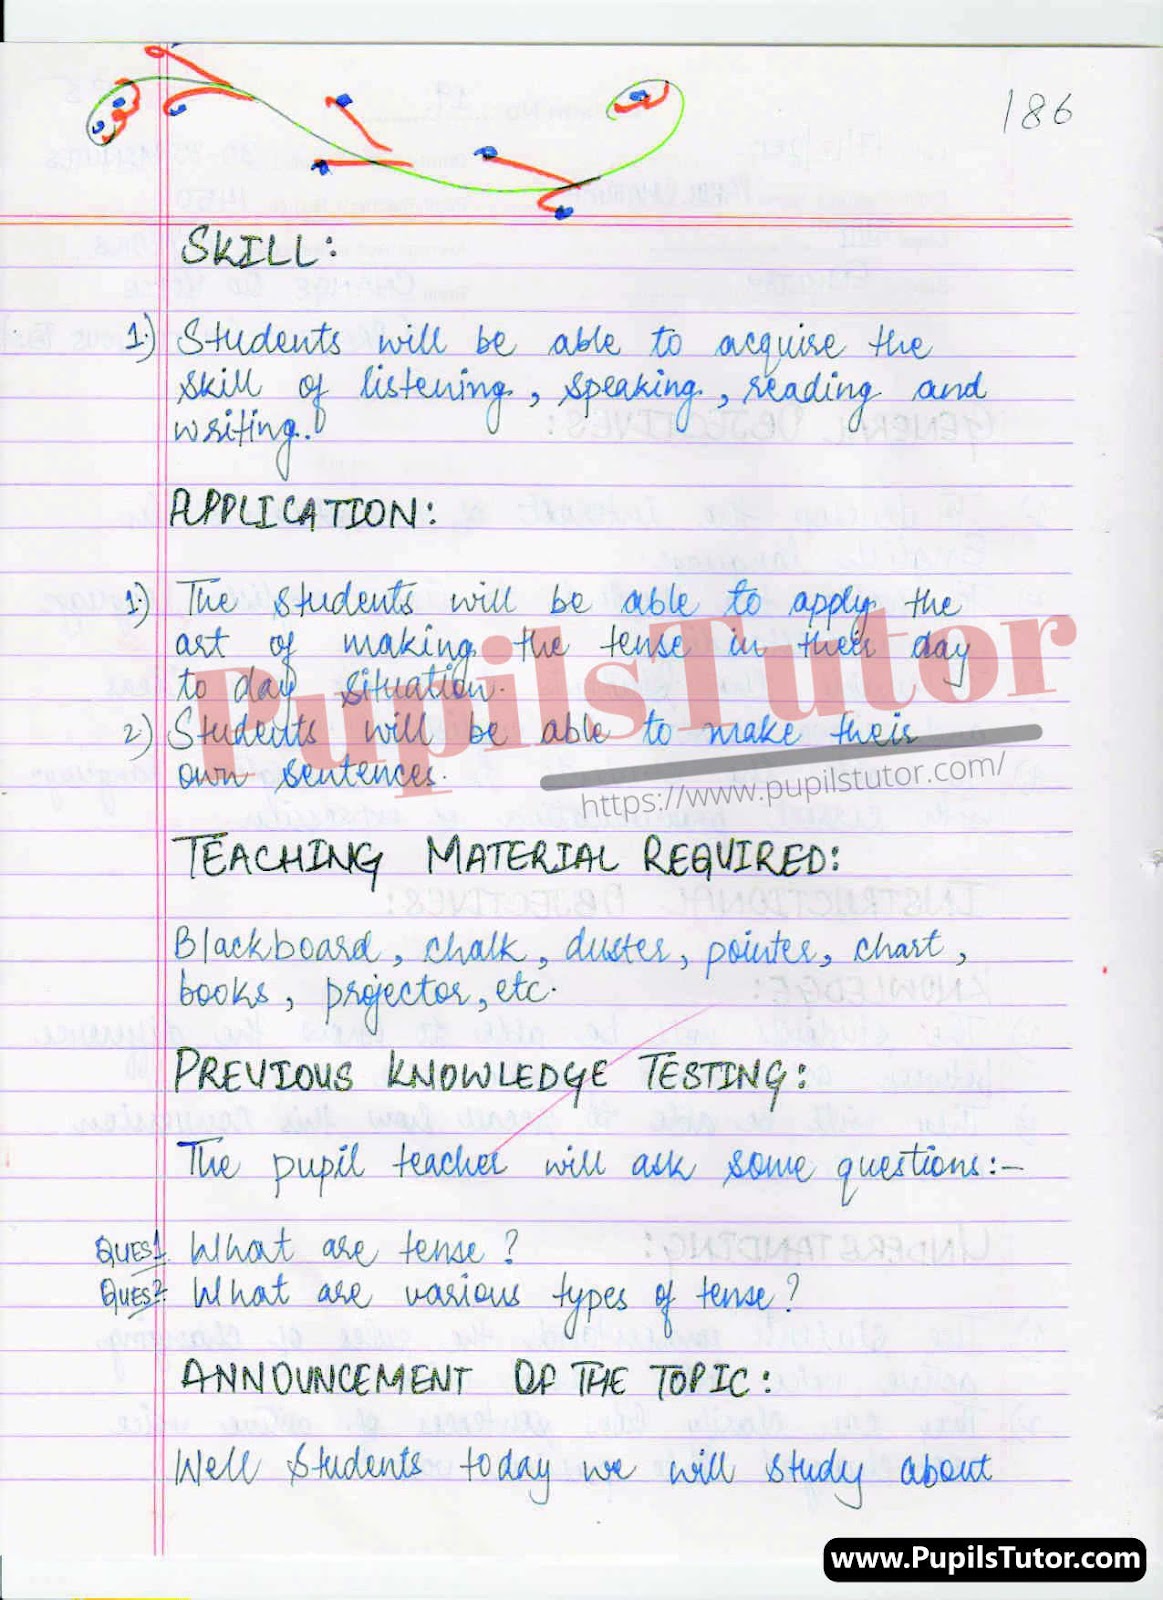 Discussion And Mega Teaching Skill Active And Passive Voice Lesson Plan For B.Ed And D.el.ed In English Medium Free Download PDF And PPT (Power Point Presentation And Slides) – (Page And Image Number 2) – PupilsTutor